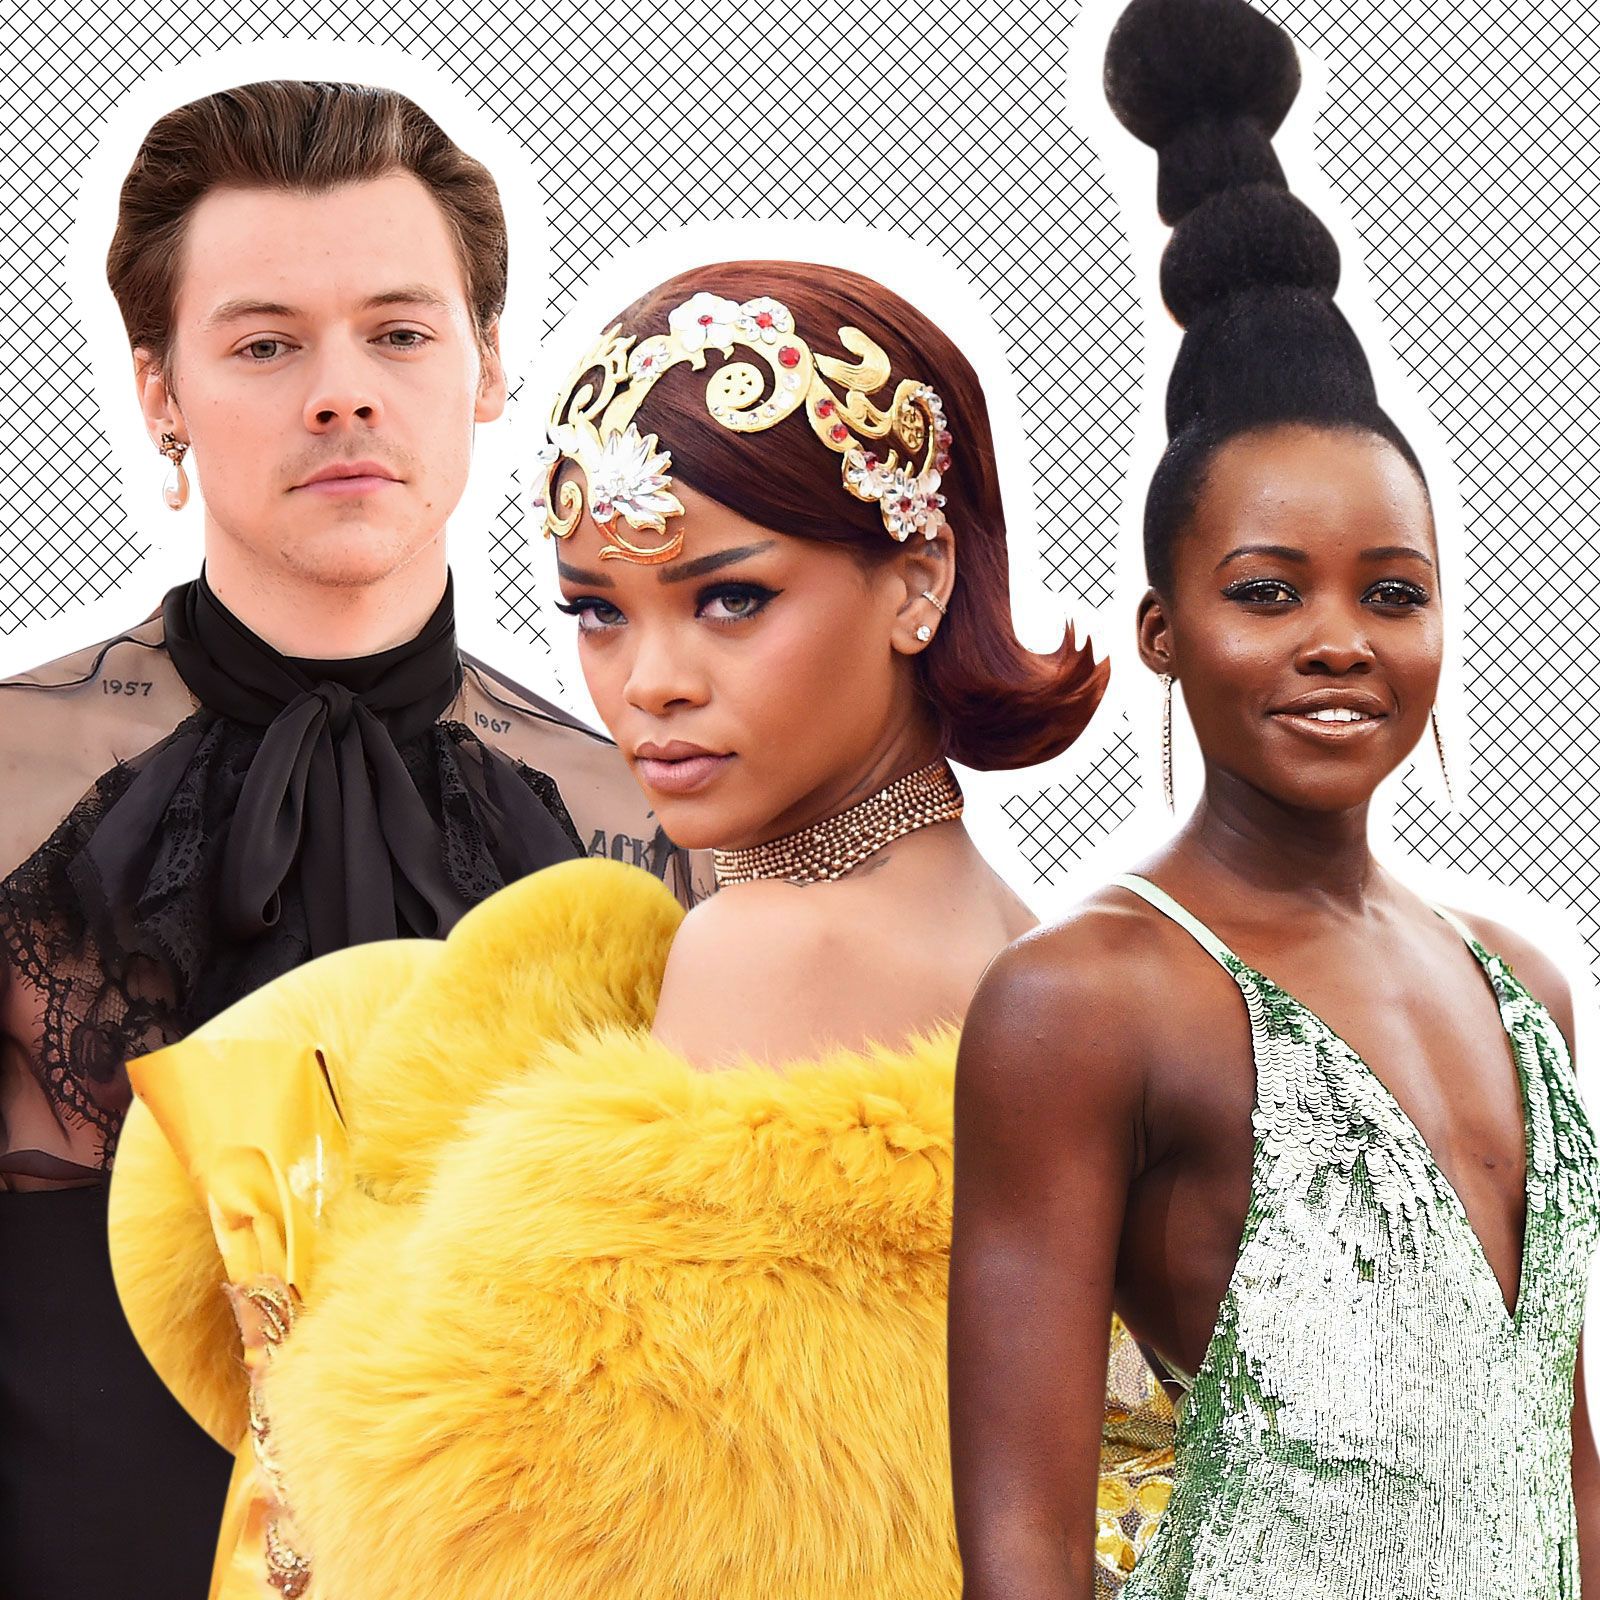 The Best Met Gala Red Carpet Looks of All Time